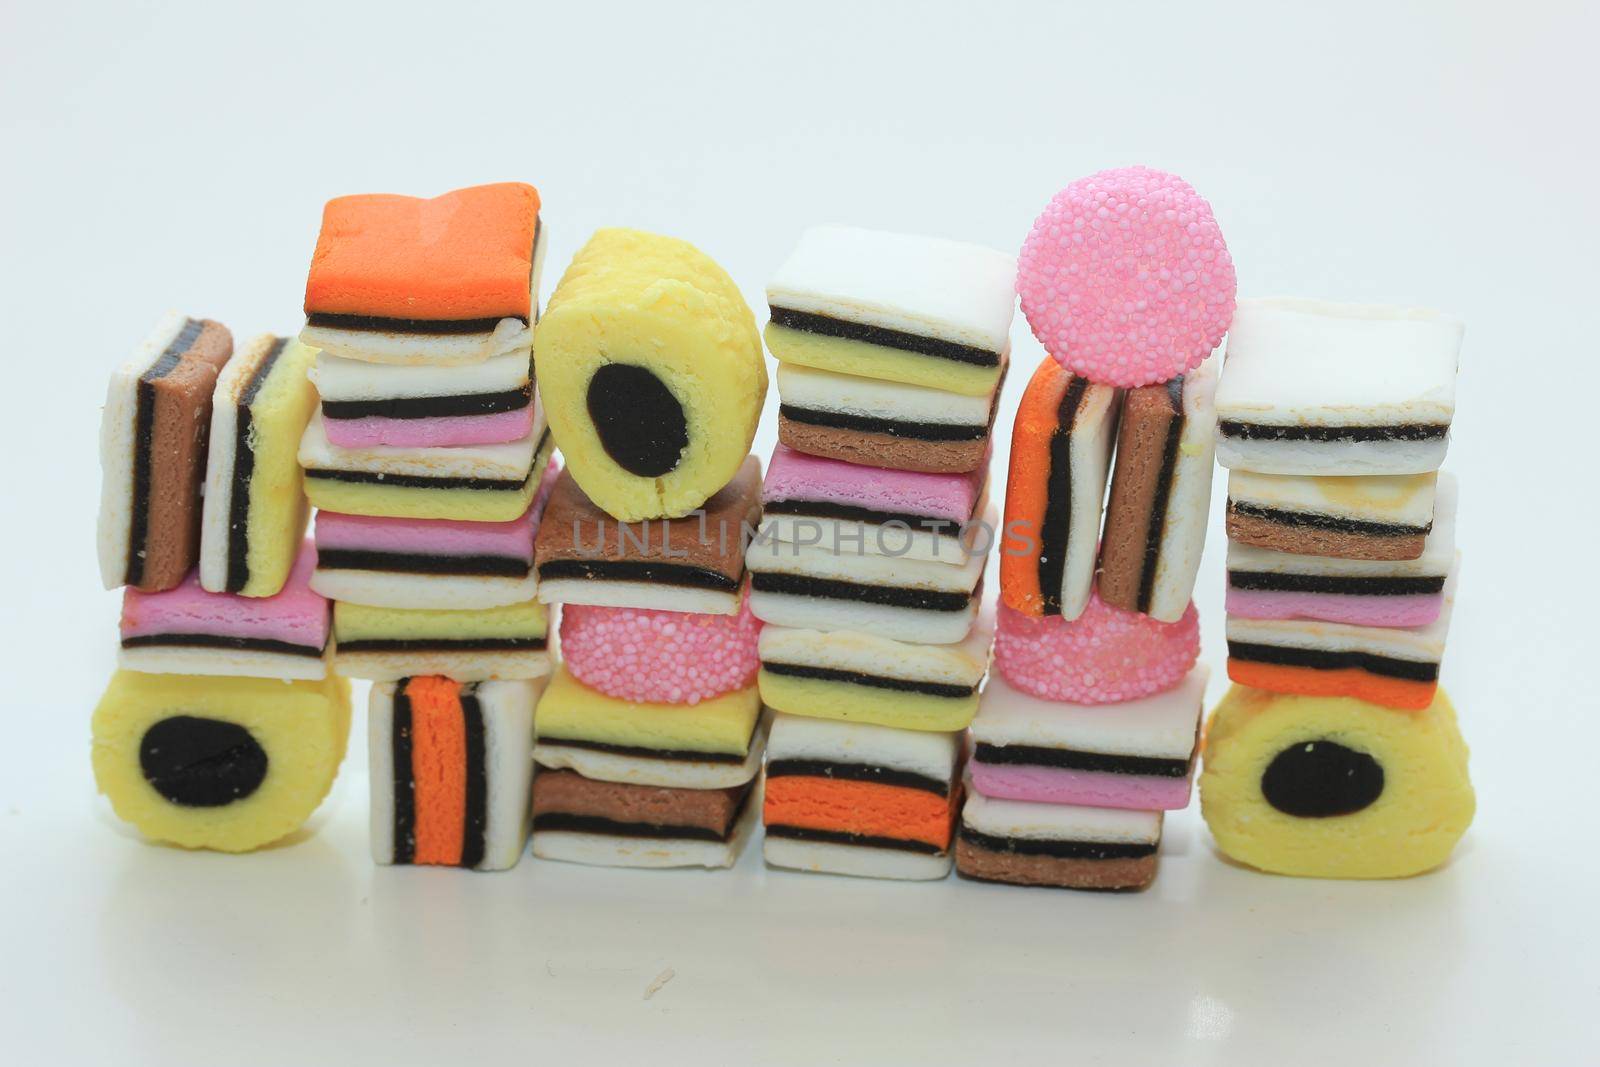 Stacked liquorice allsorts in different shapes, colors and sizes